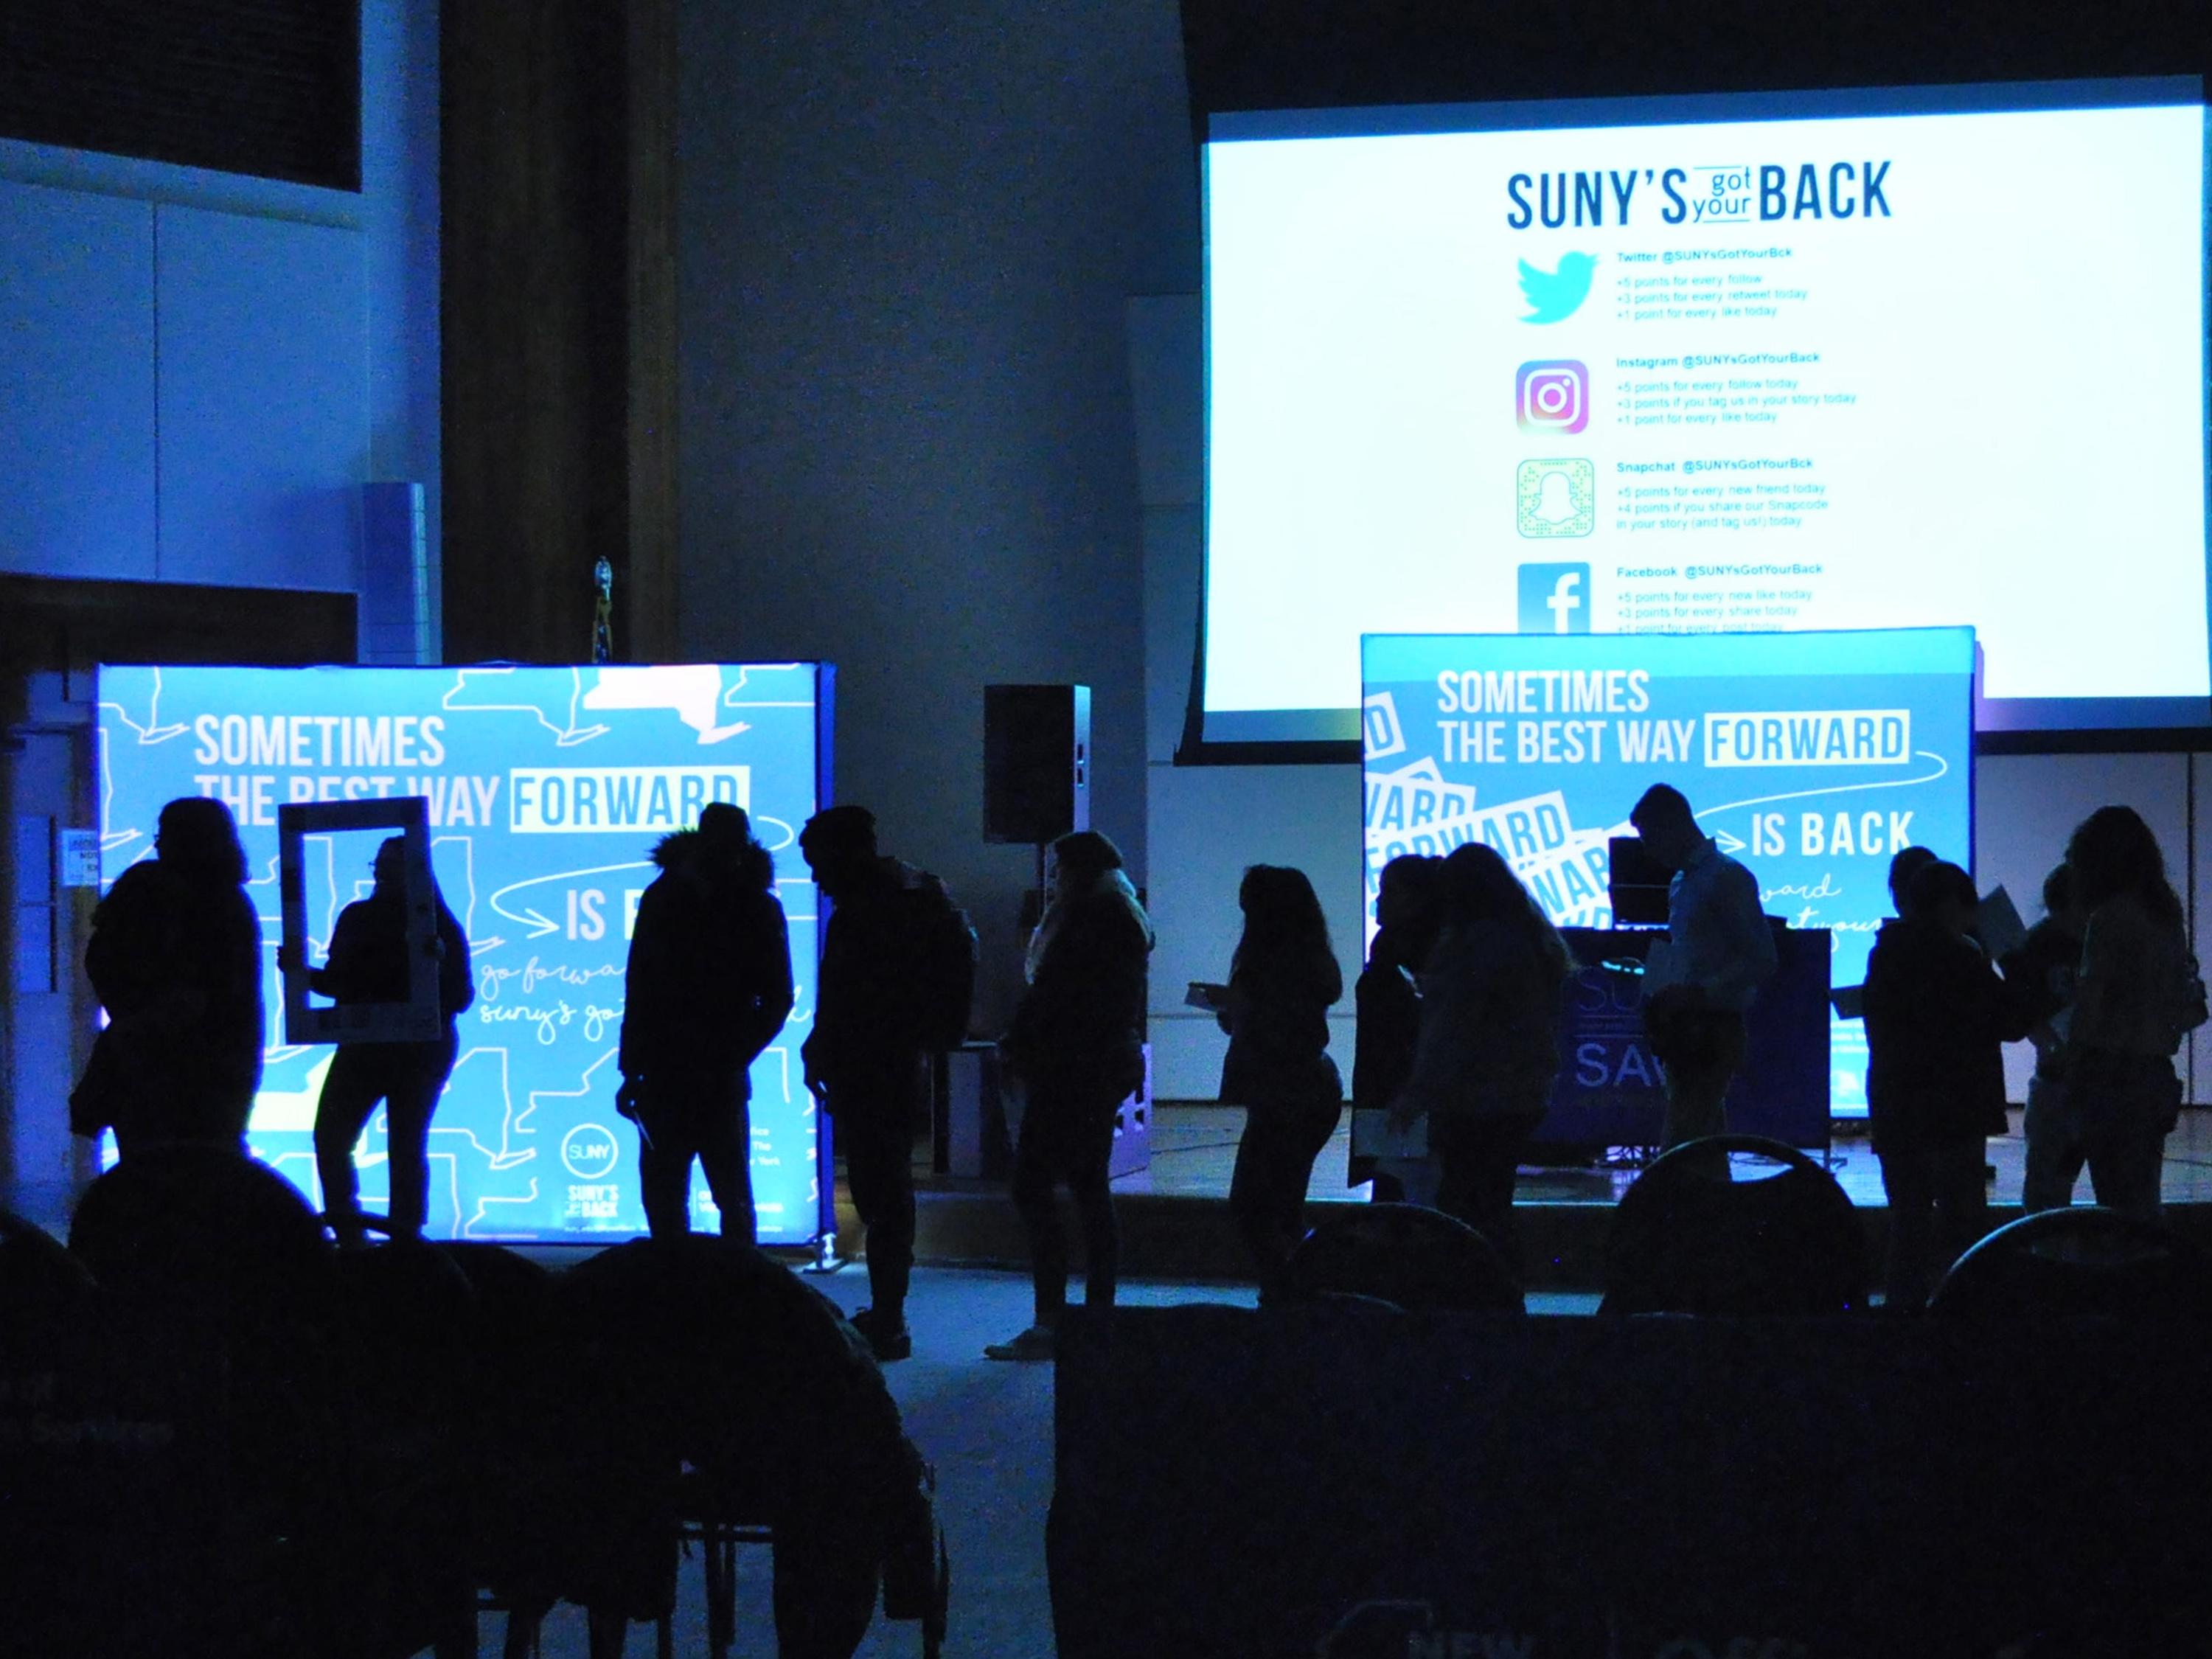 Oswego students line up to fill comfort kits as part of SUNY's Got Your Back initiative